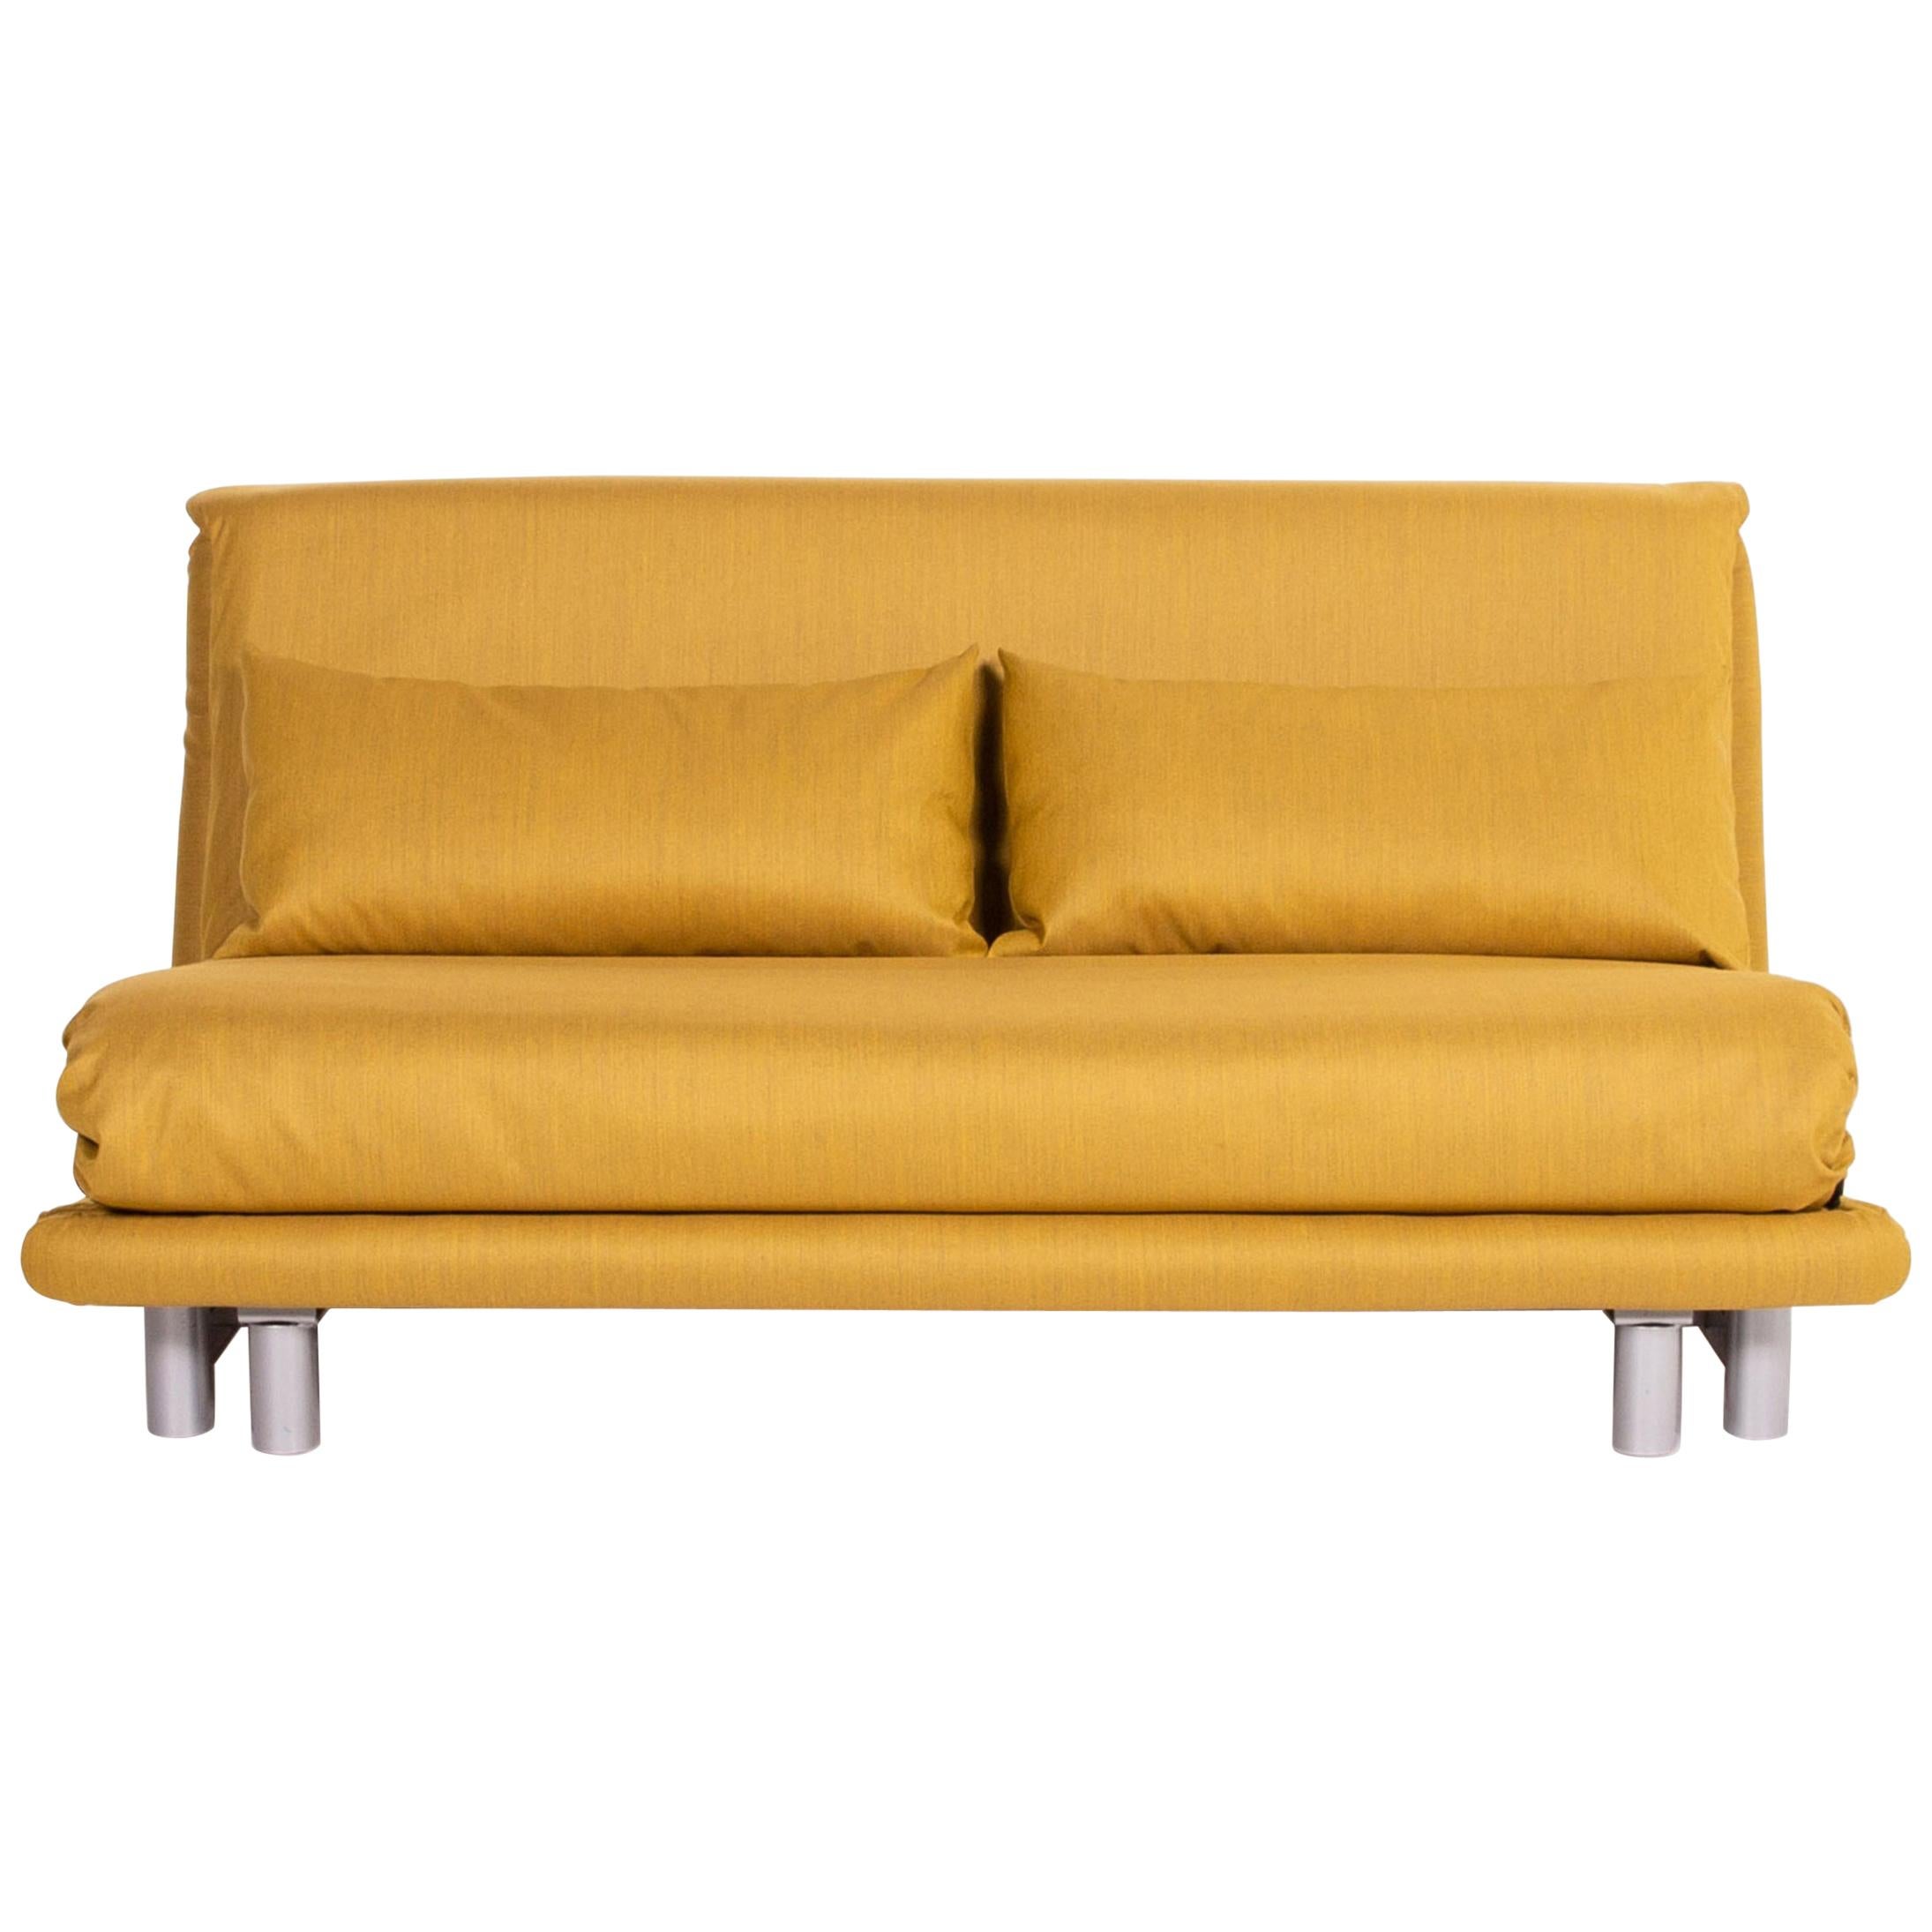 Ligne Roset Multy Fabric Sofa Bed Yellow Two-Seat Sofa Sleep Function Couch